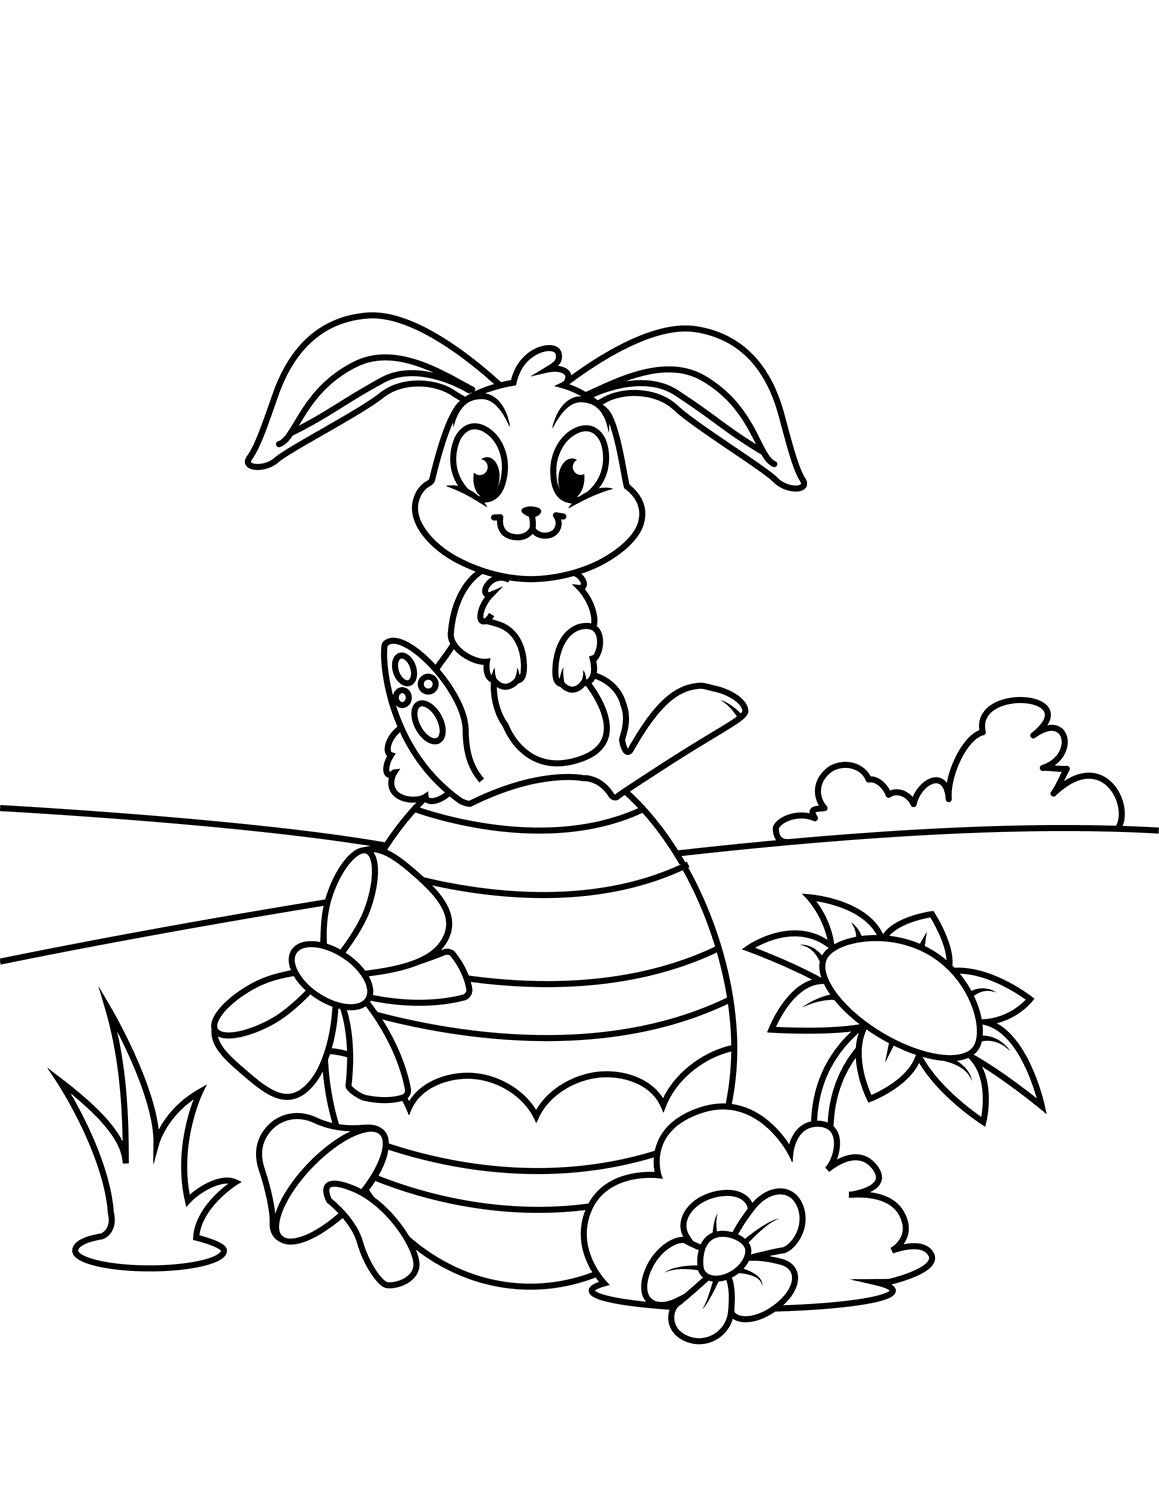 Cute Bunny Sitting On Easter Egg Coloring Page